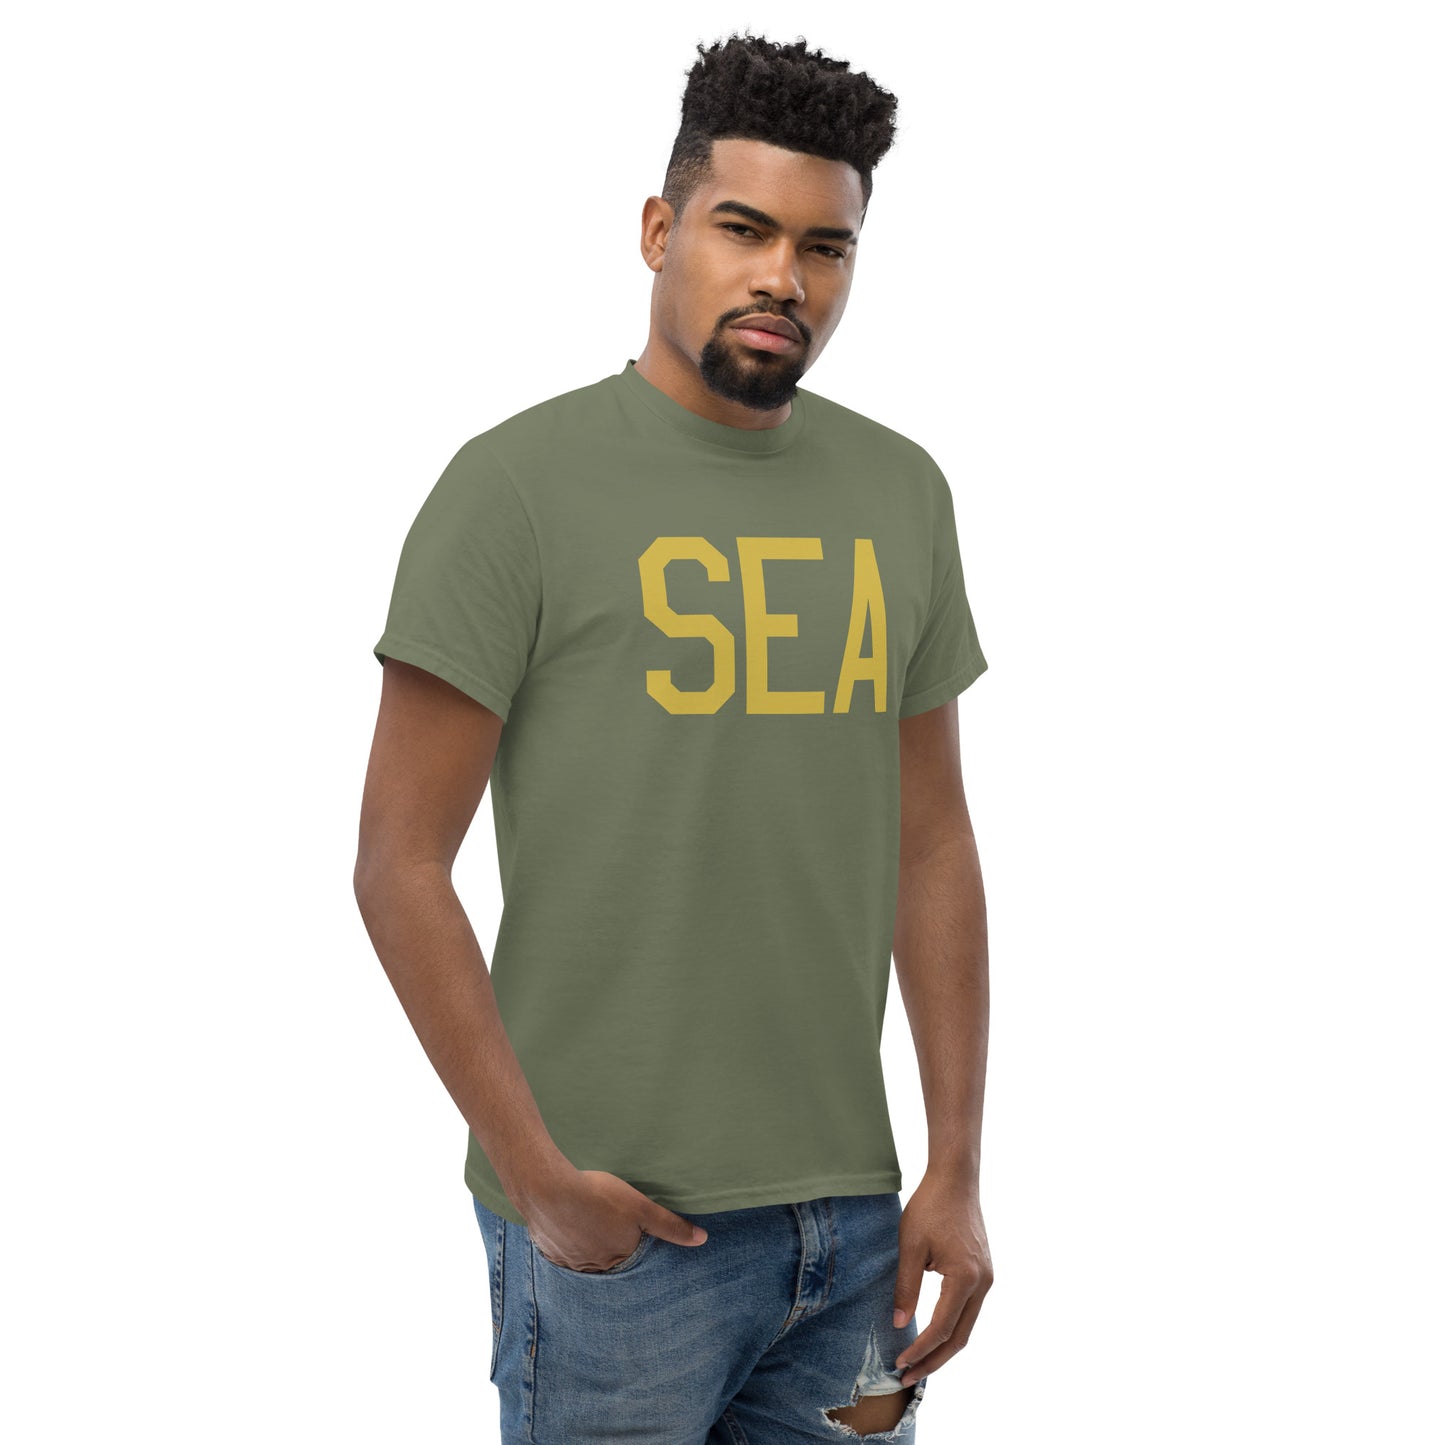 Aviation Enthusiast Men's Tee - Old Gold Graphic • SEA Seattle • YHM Designs - Image 08